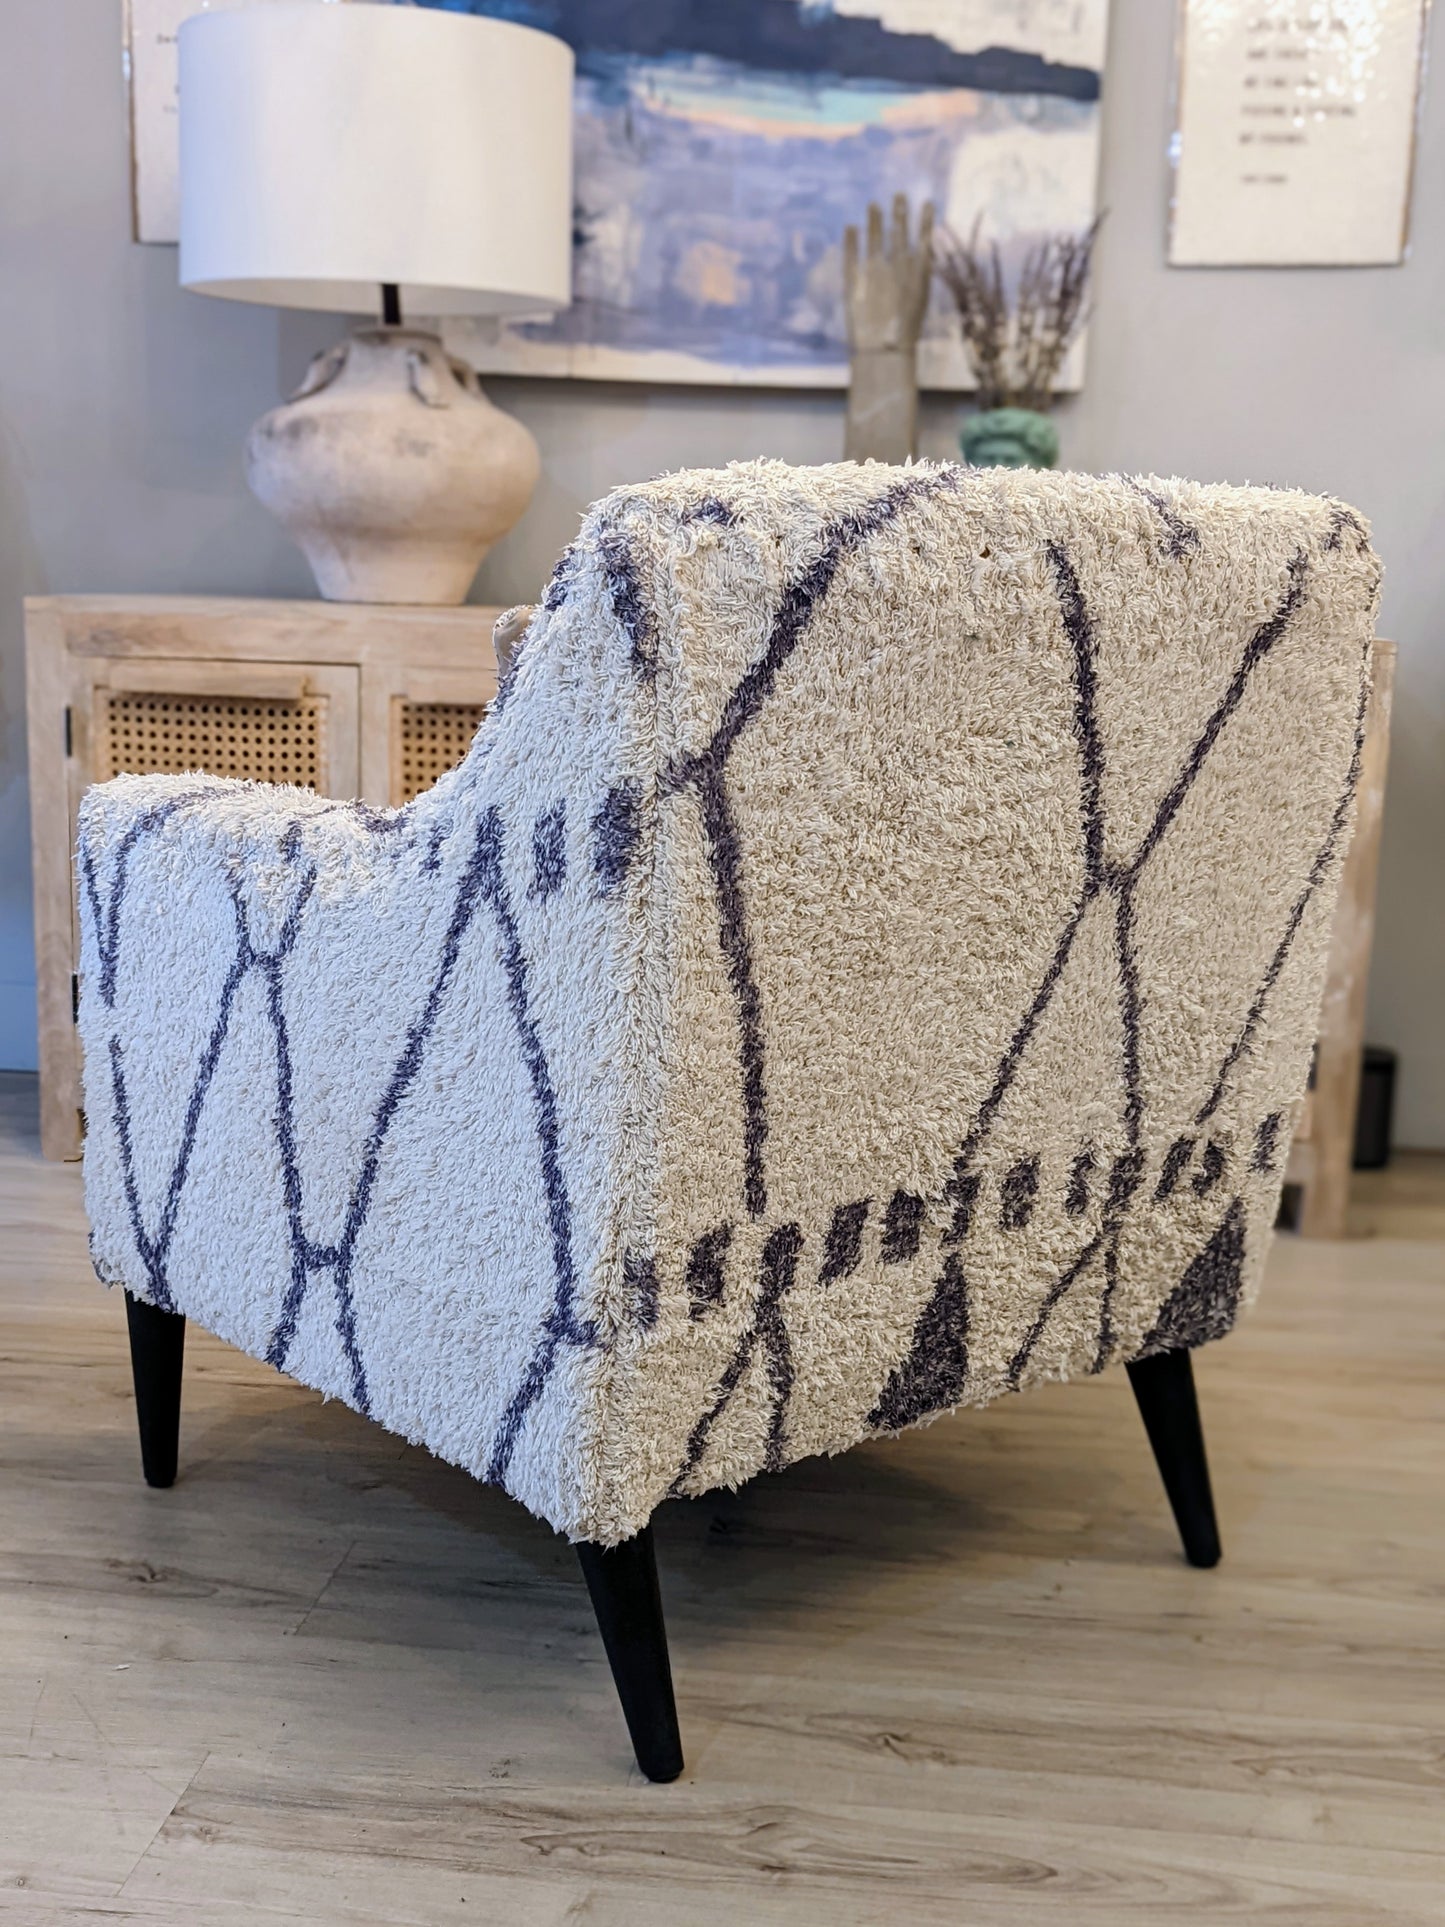 Woven Cotton Shag Upholstered Chair